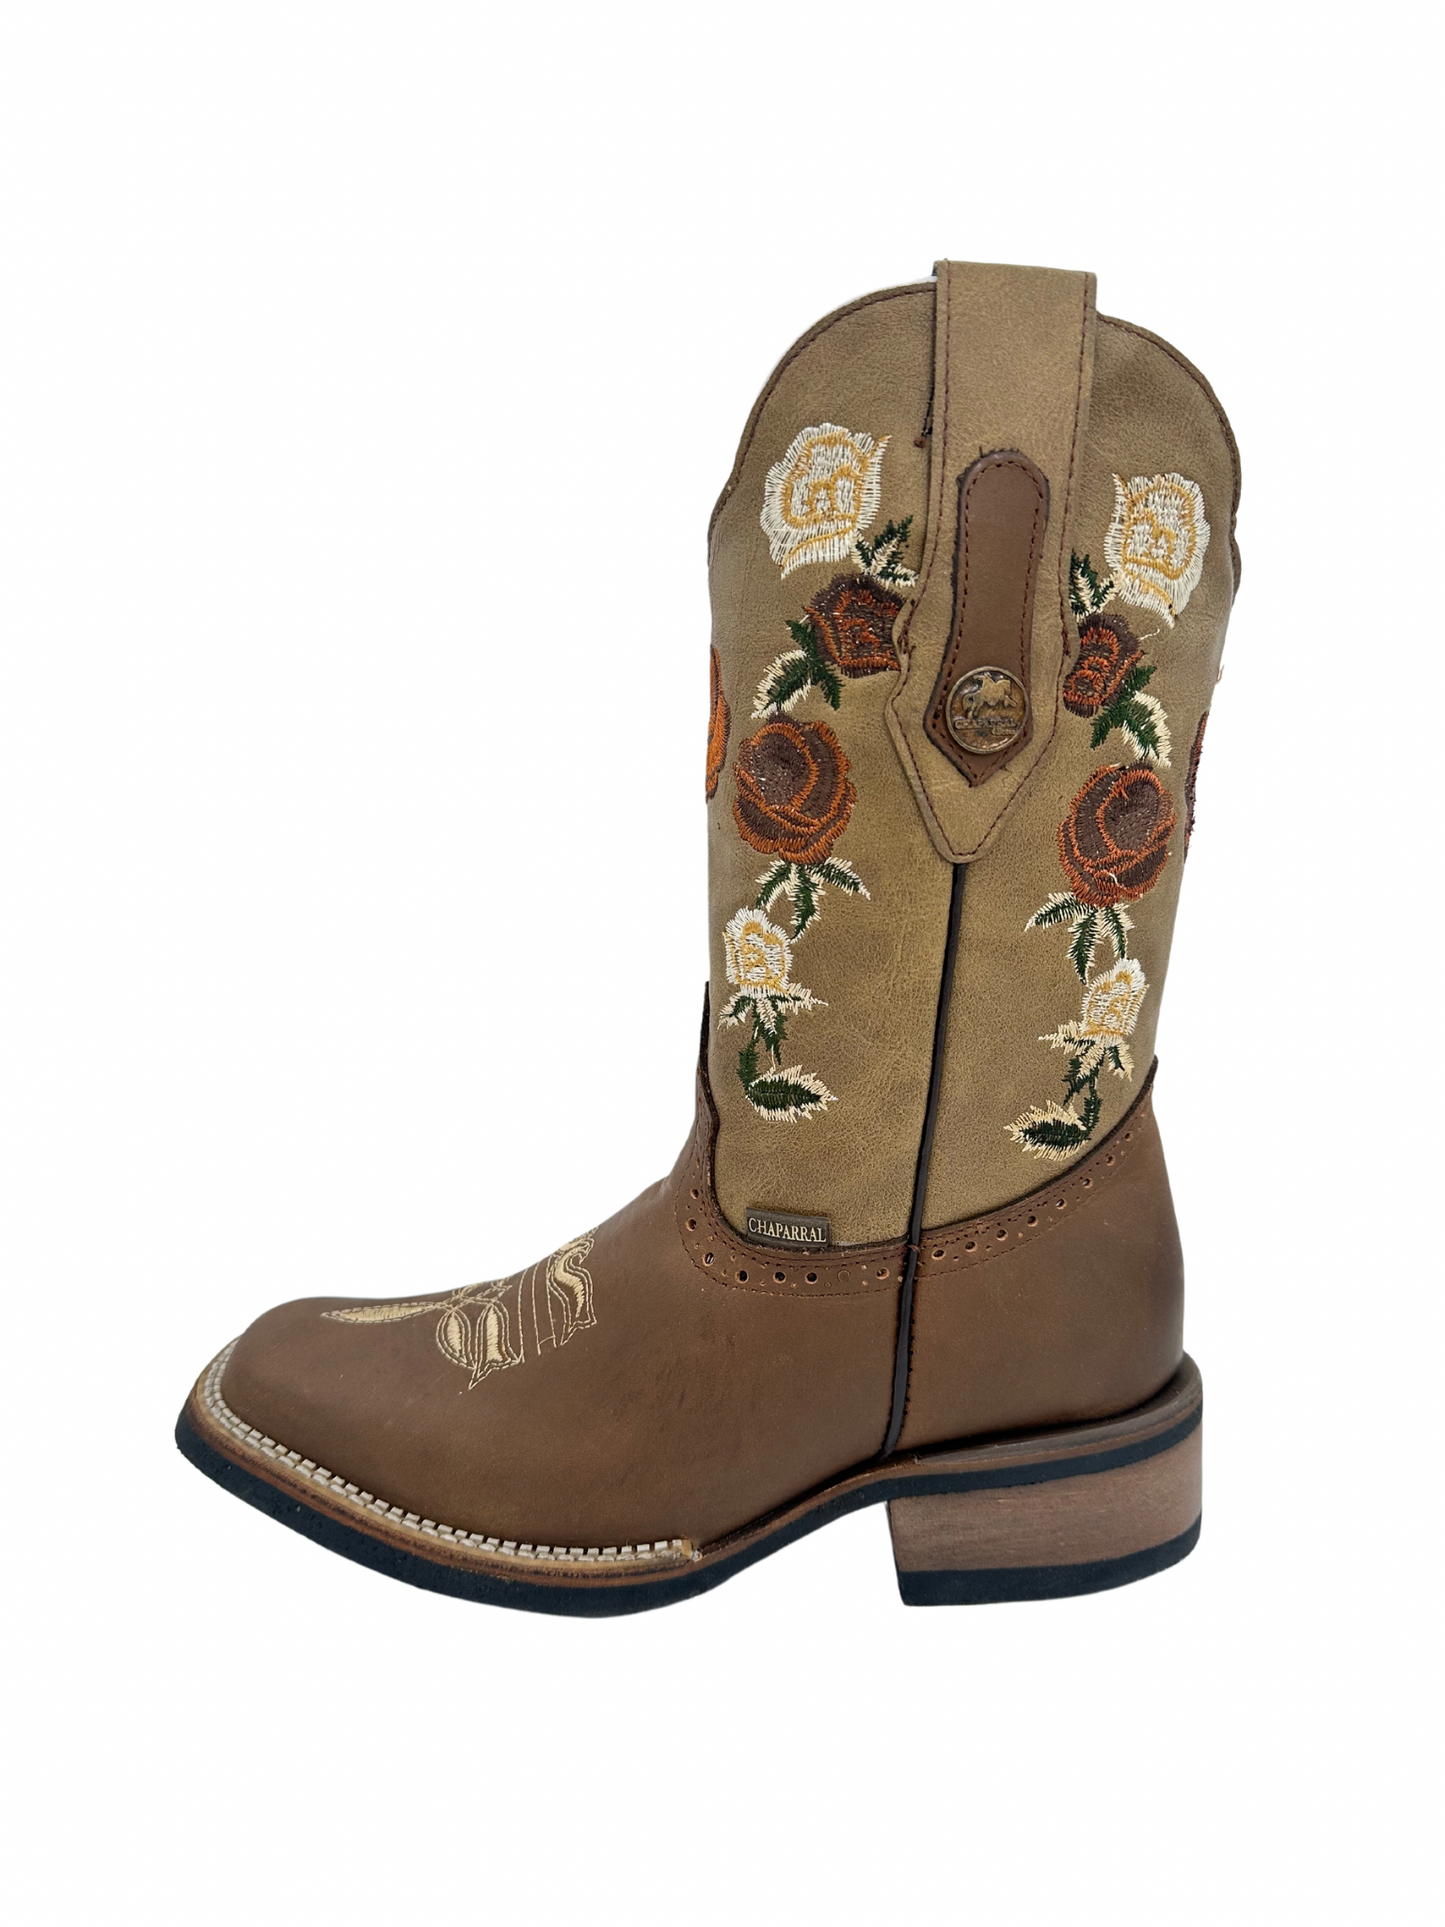 Chaparral Women's Paja Floral Square Toe Leather Boot